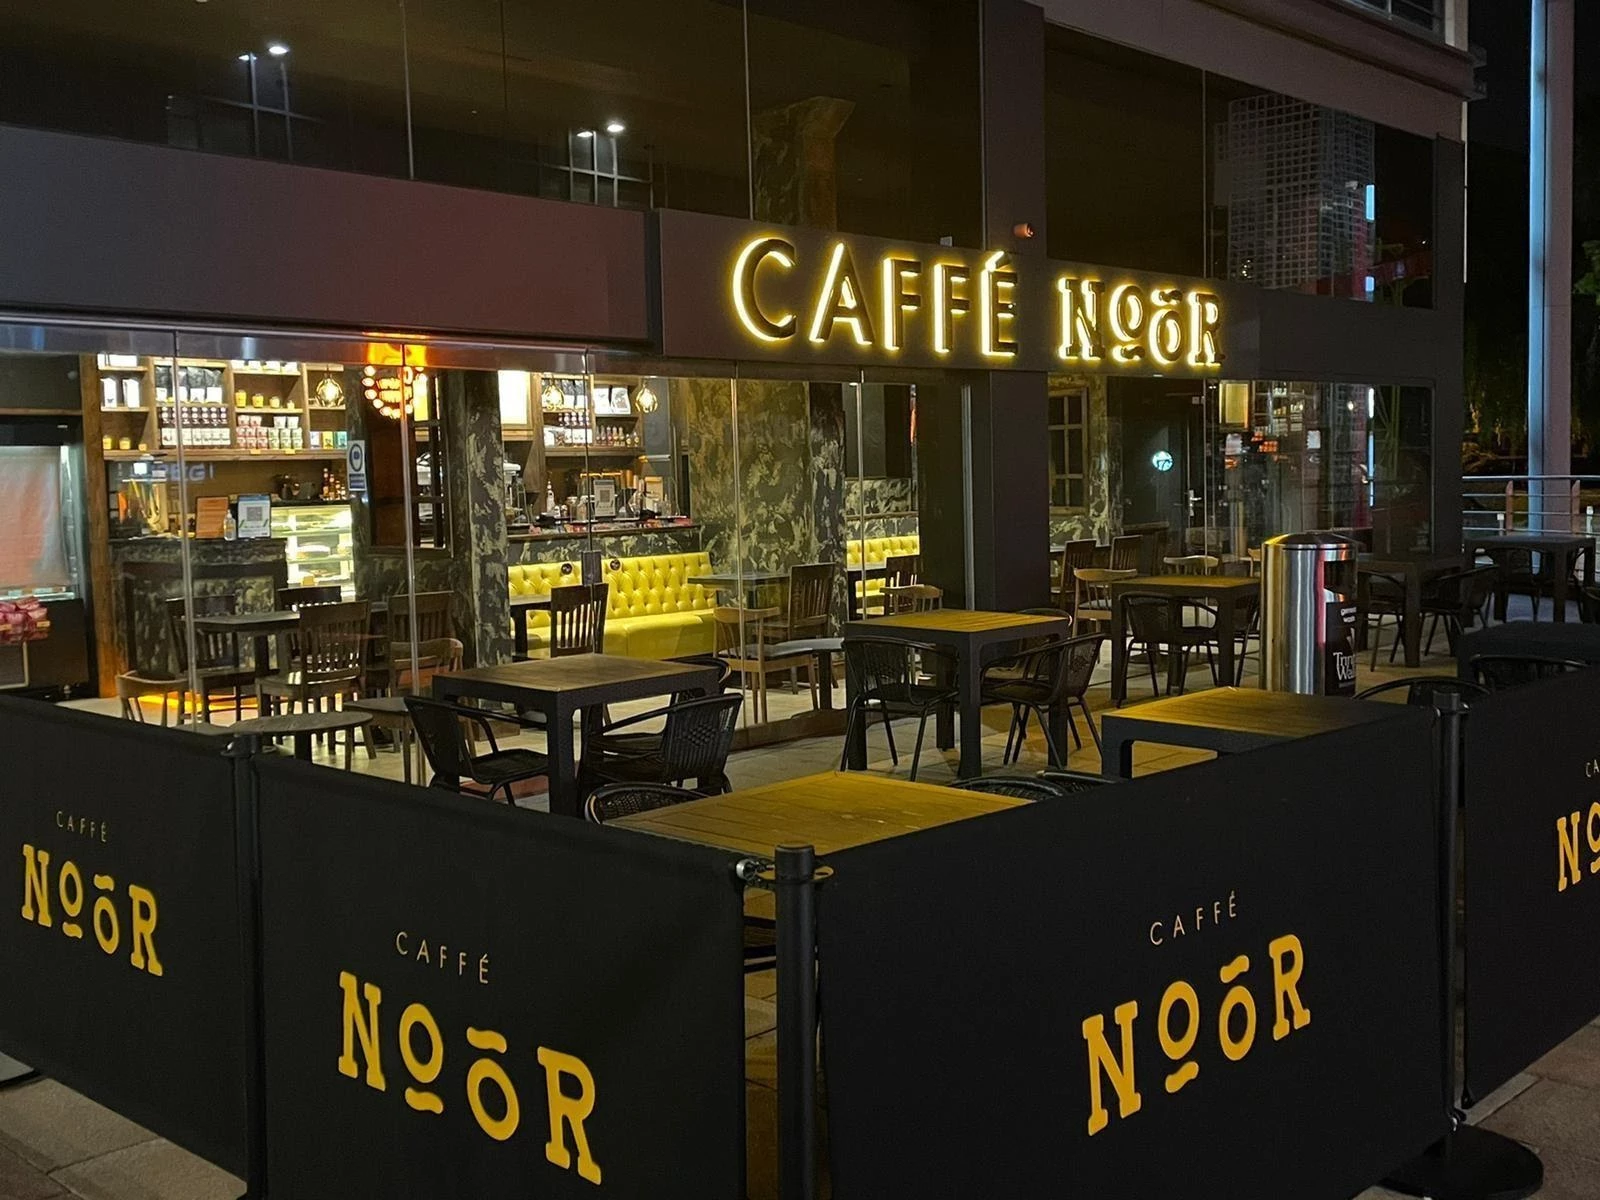 Wakefield's Caffe Noor, situated in Trinity Walk